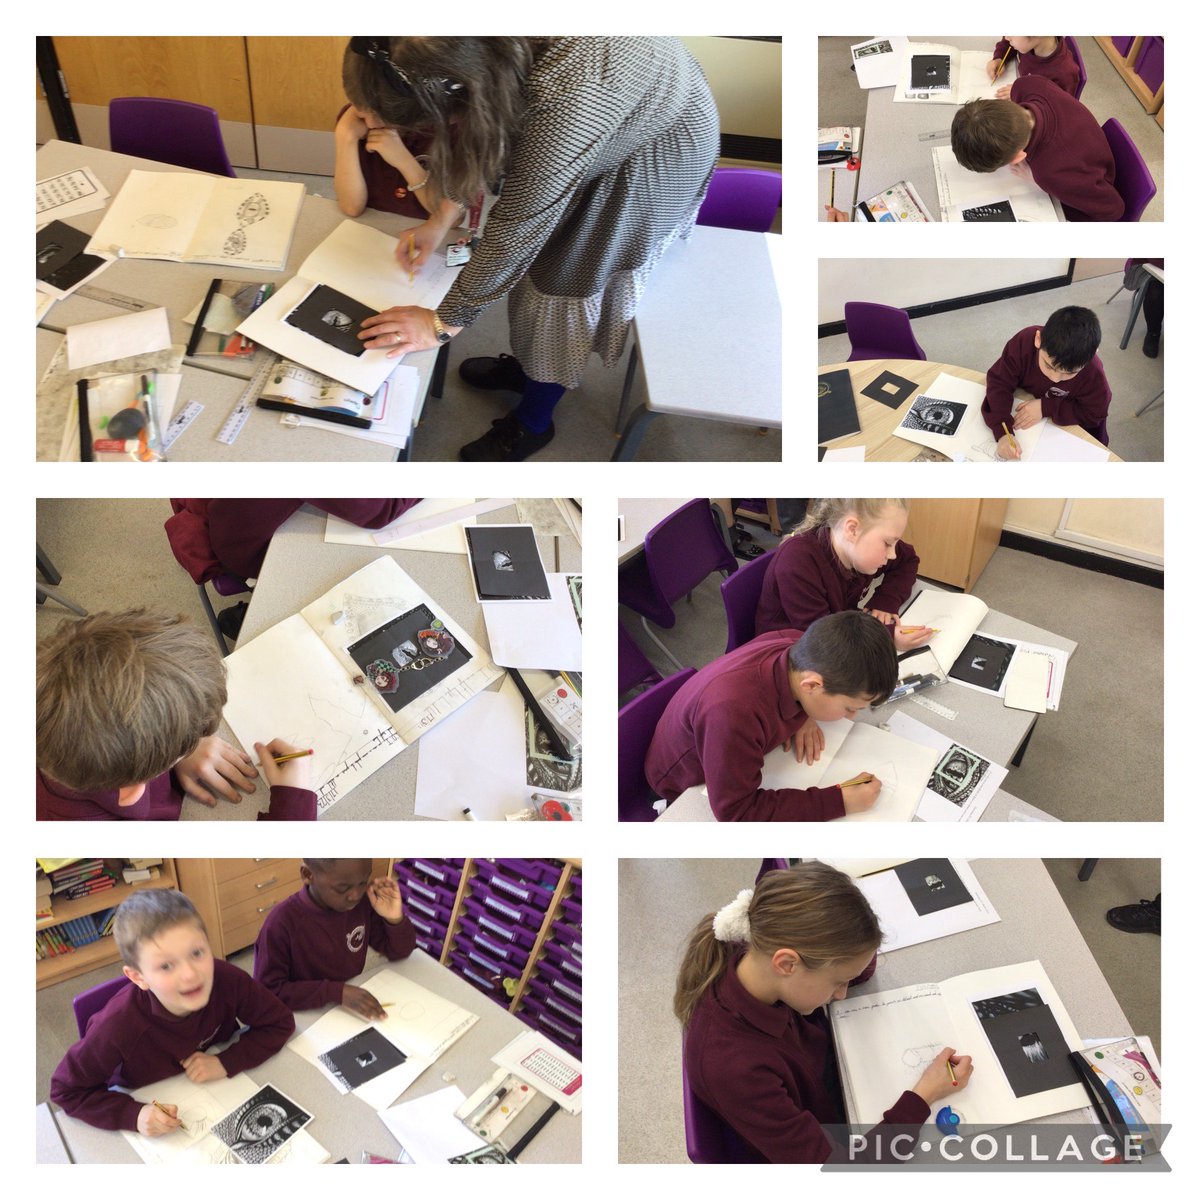 Today Mr Williams’ class have enjoyed an art lesson with Mrs Stockton about using a viewfinder to zoom in and focus on the detail of a picture.